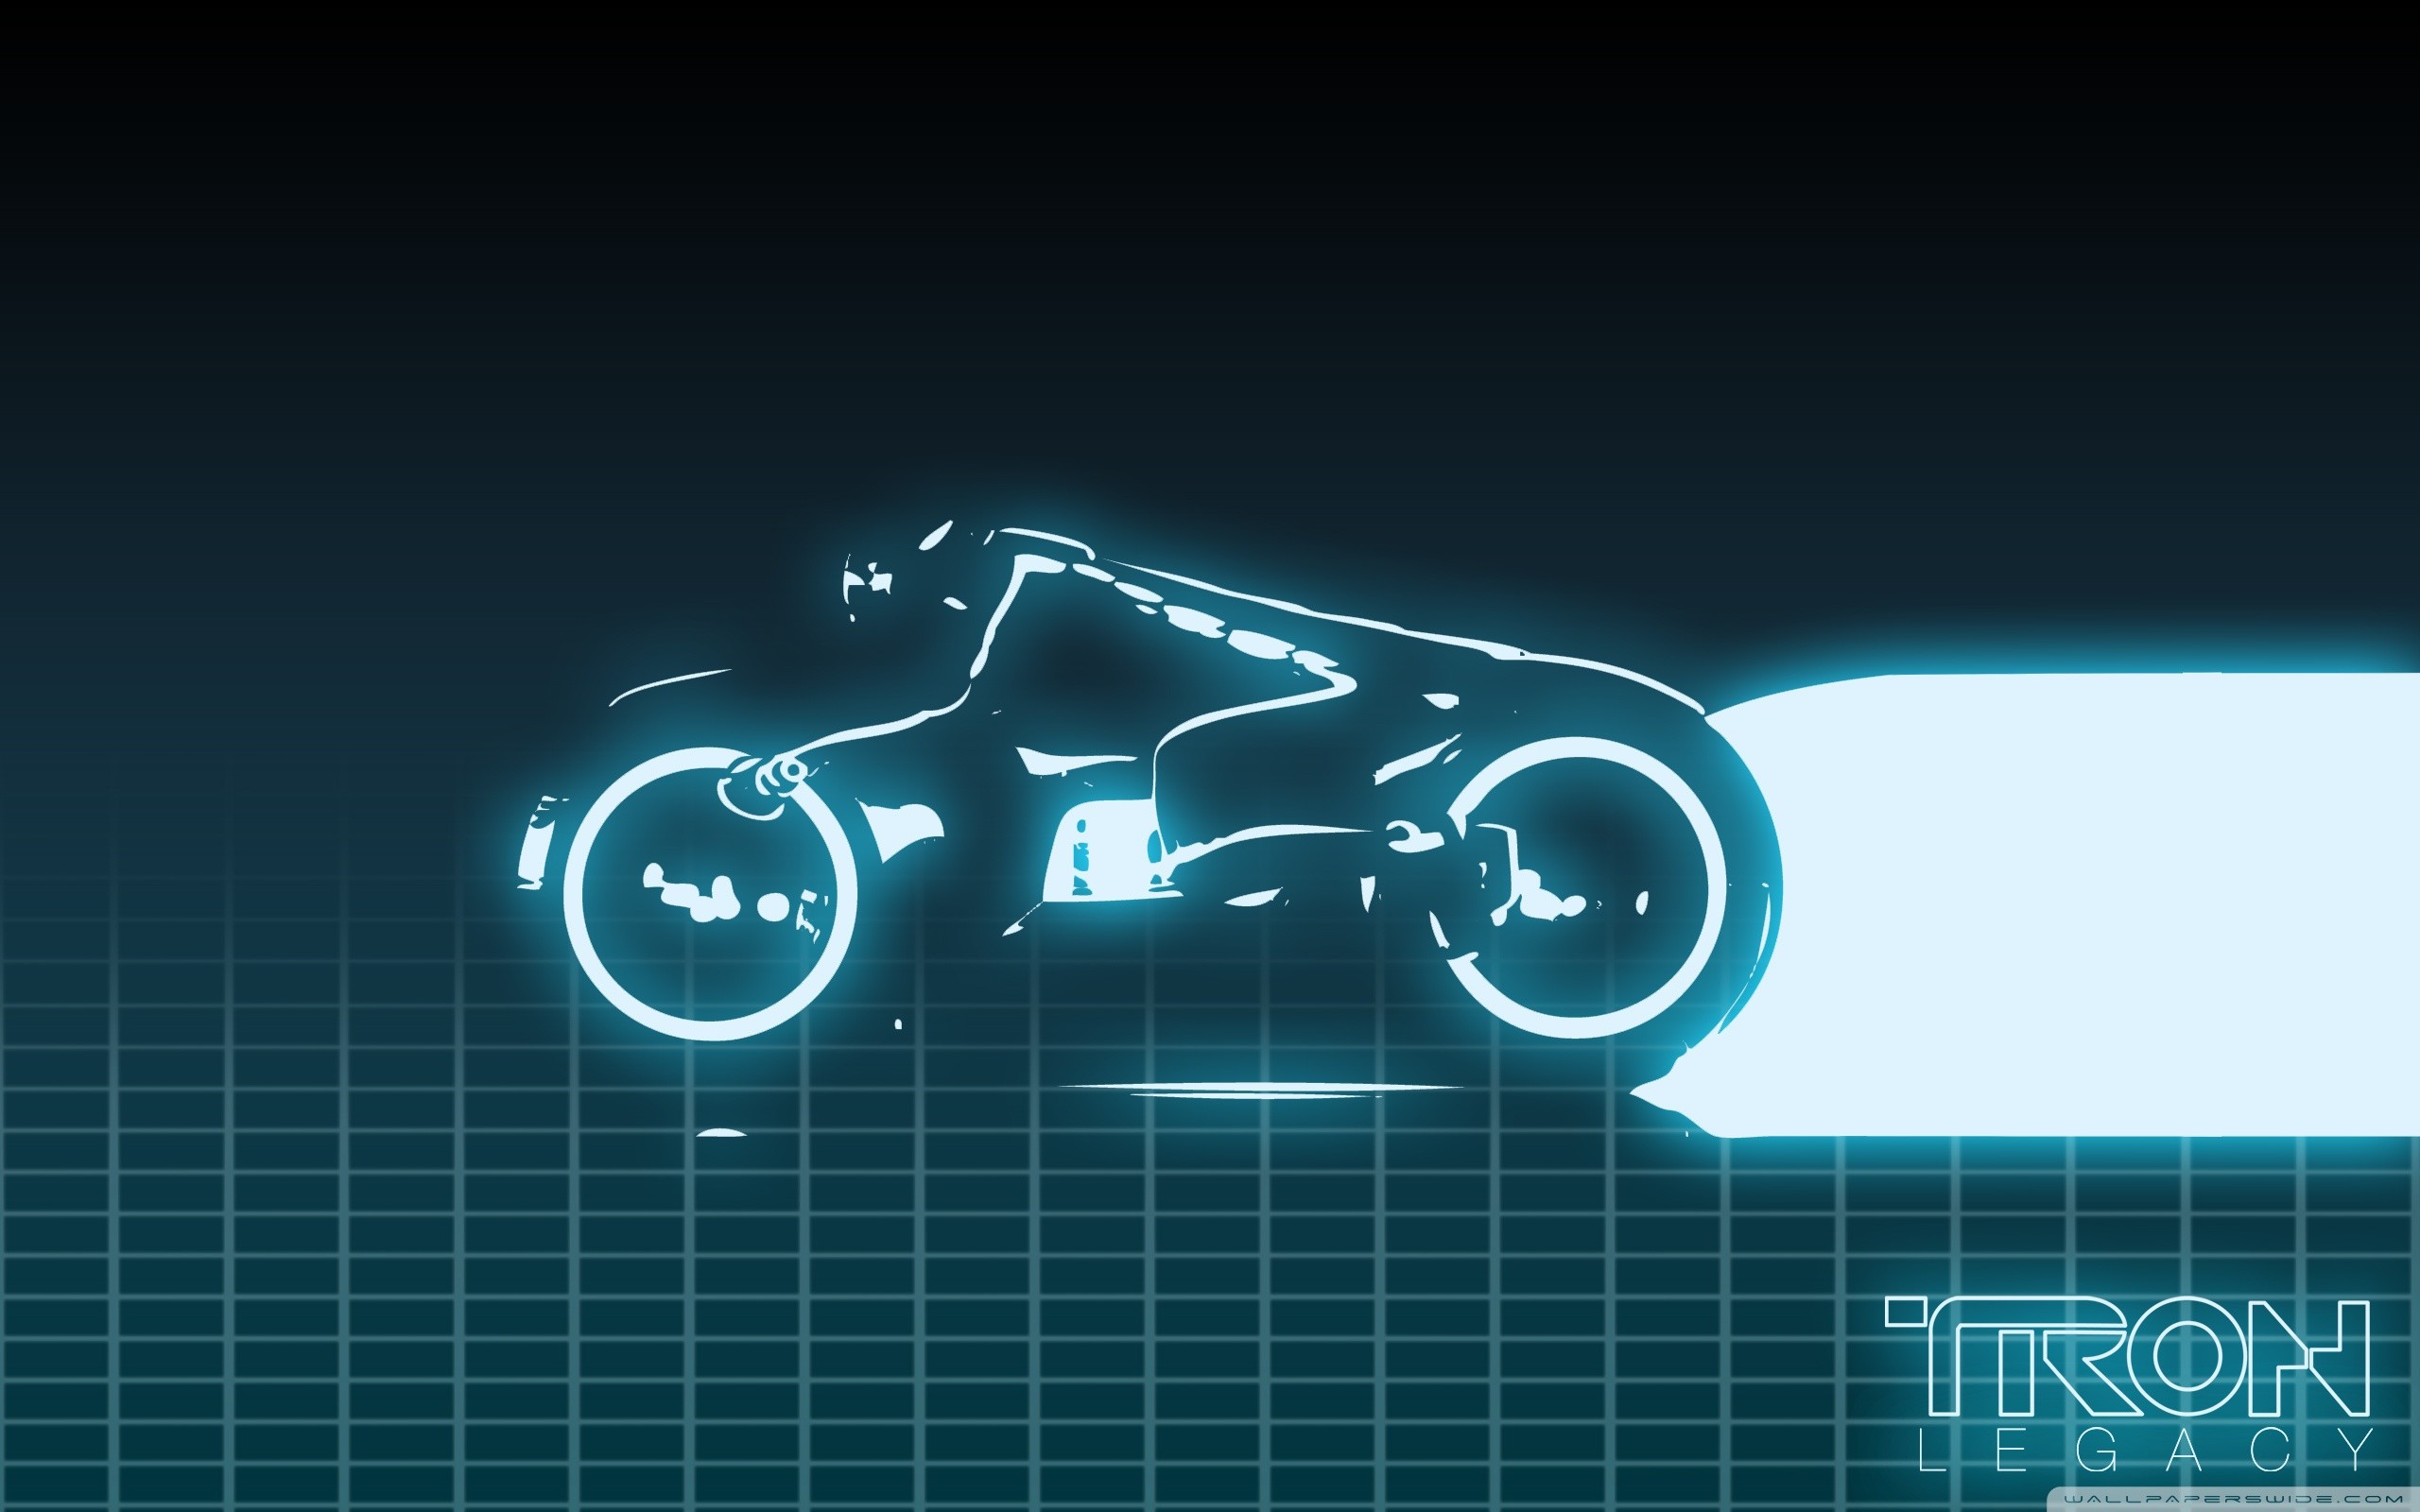 2560x1600 Search Results for “tron grid ipad wallpaper” – Adorable Wallpapers